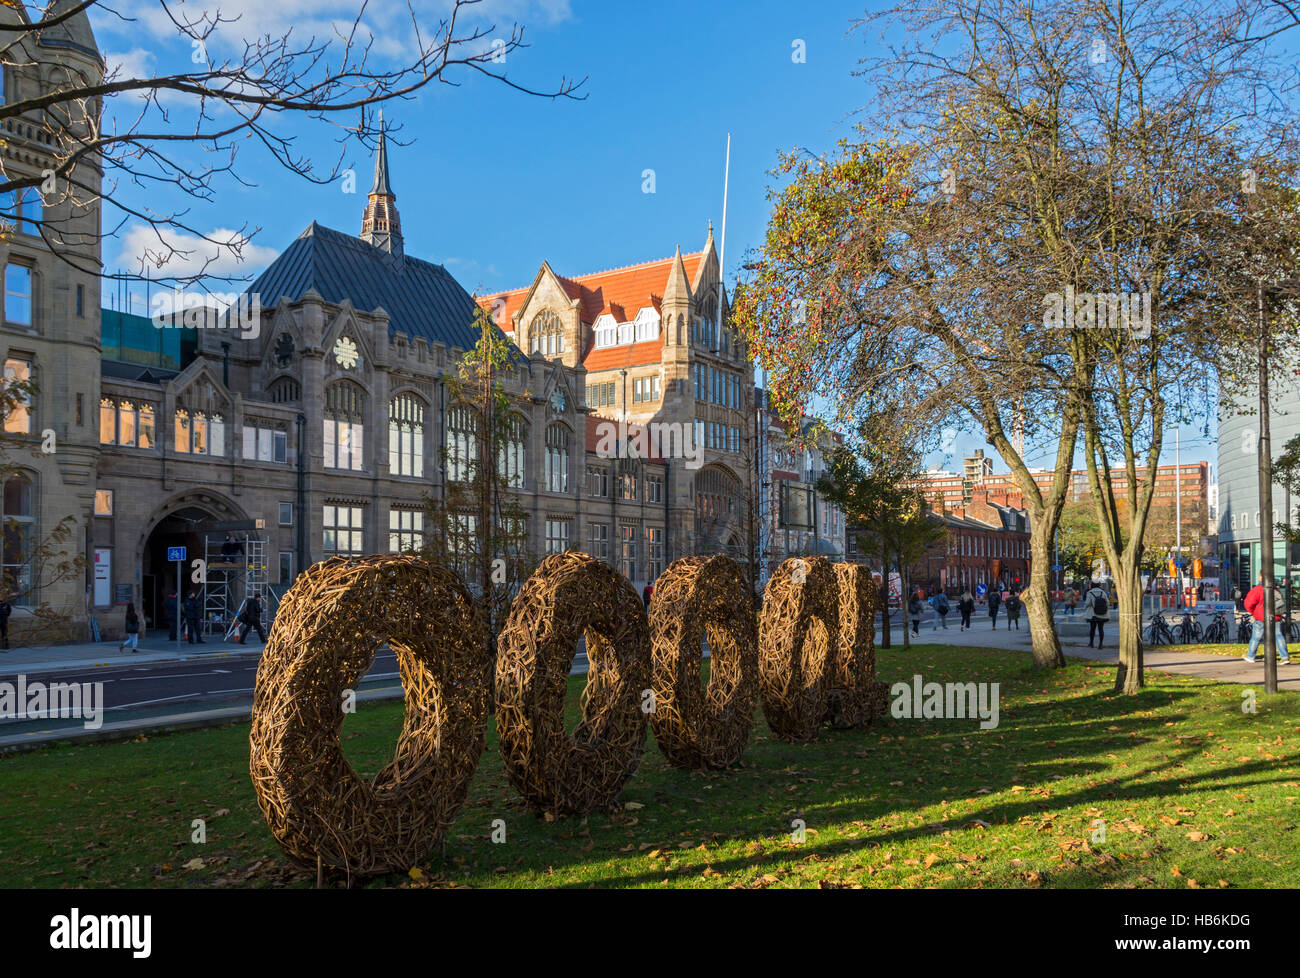 '10,000 Actions' sign (an energy conservation programme) in wicker work, Manchester University, Oxford Road, Manchester, UK. Stock Photo